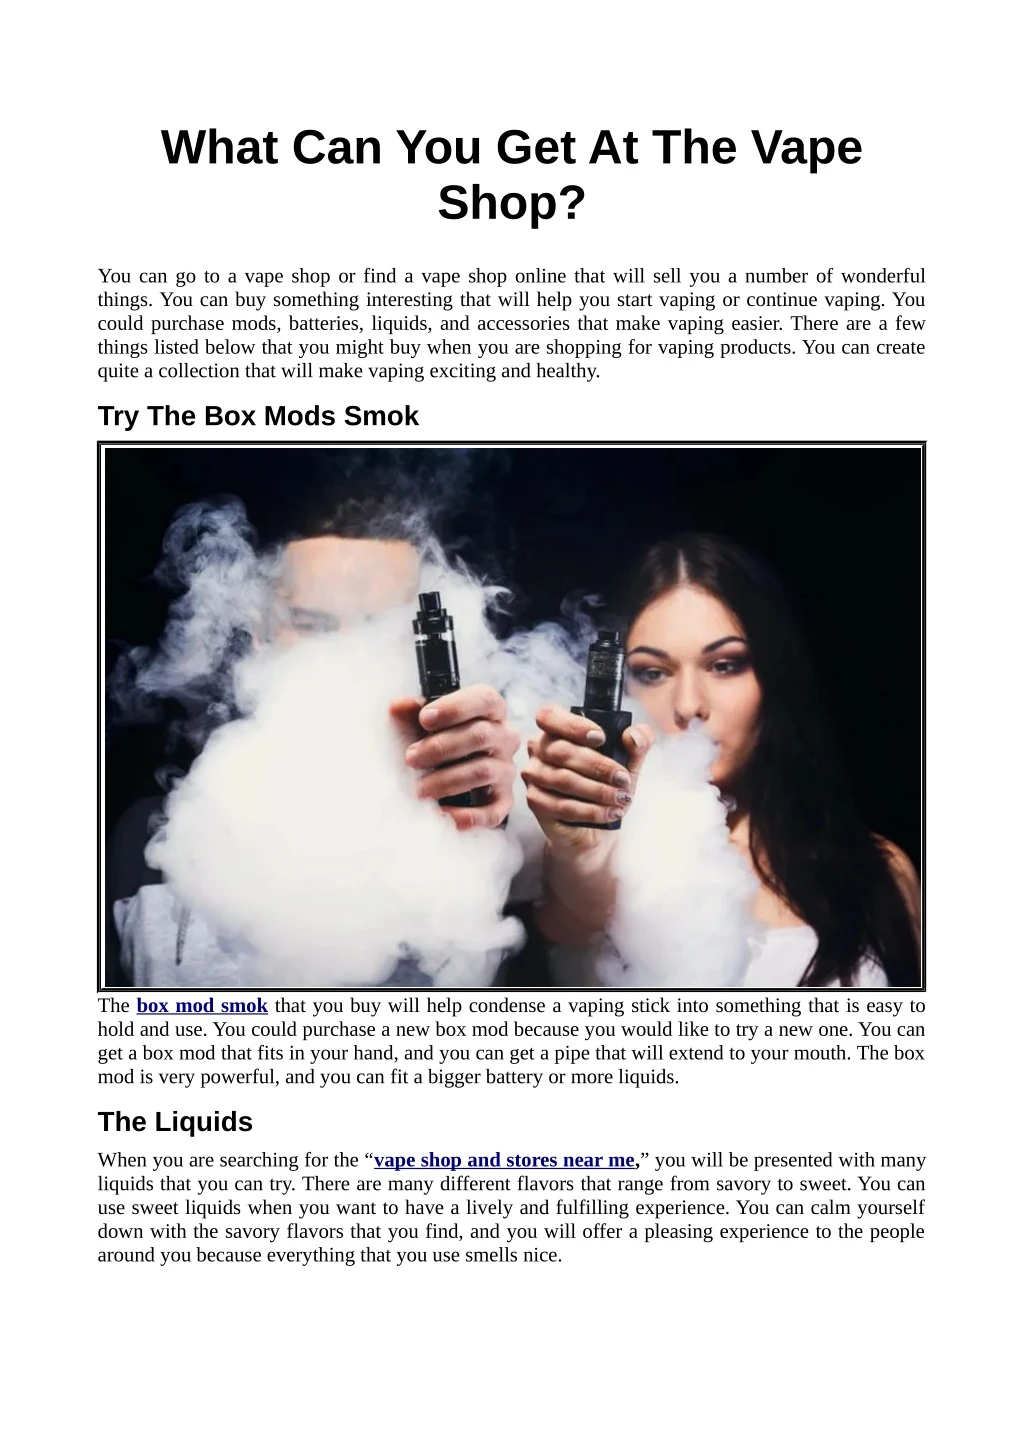 what can you get at the vape shop